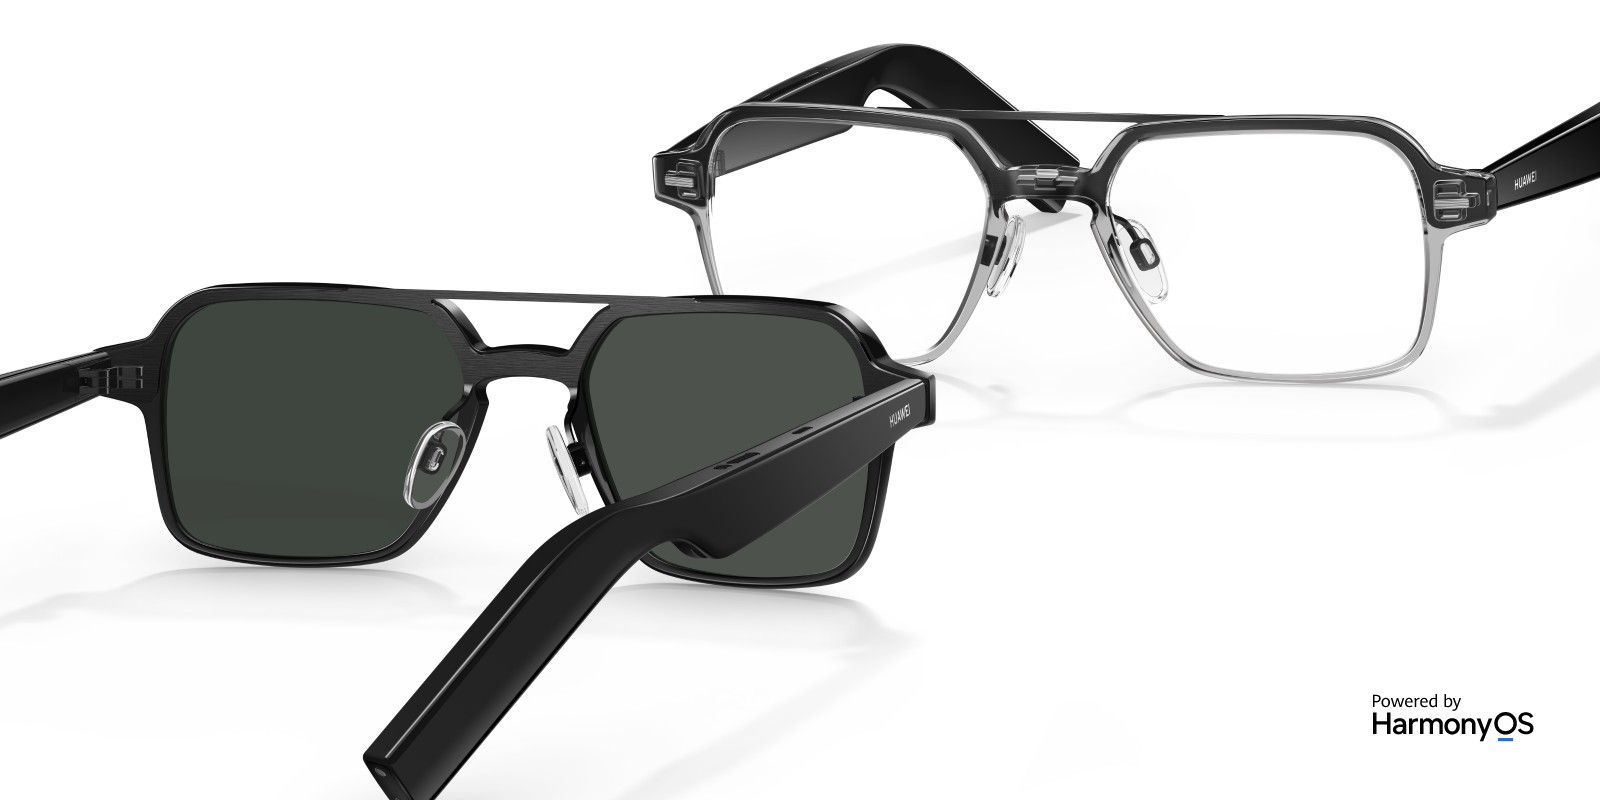 Huawei Eyewear is a smart assistant on your face